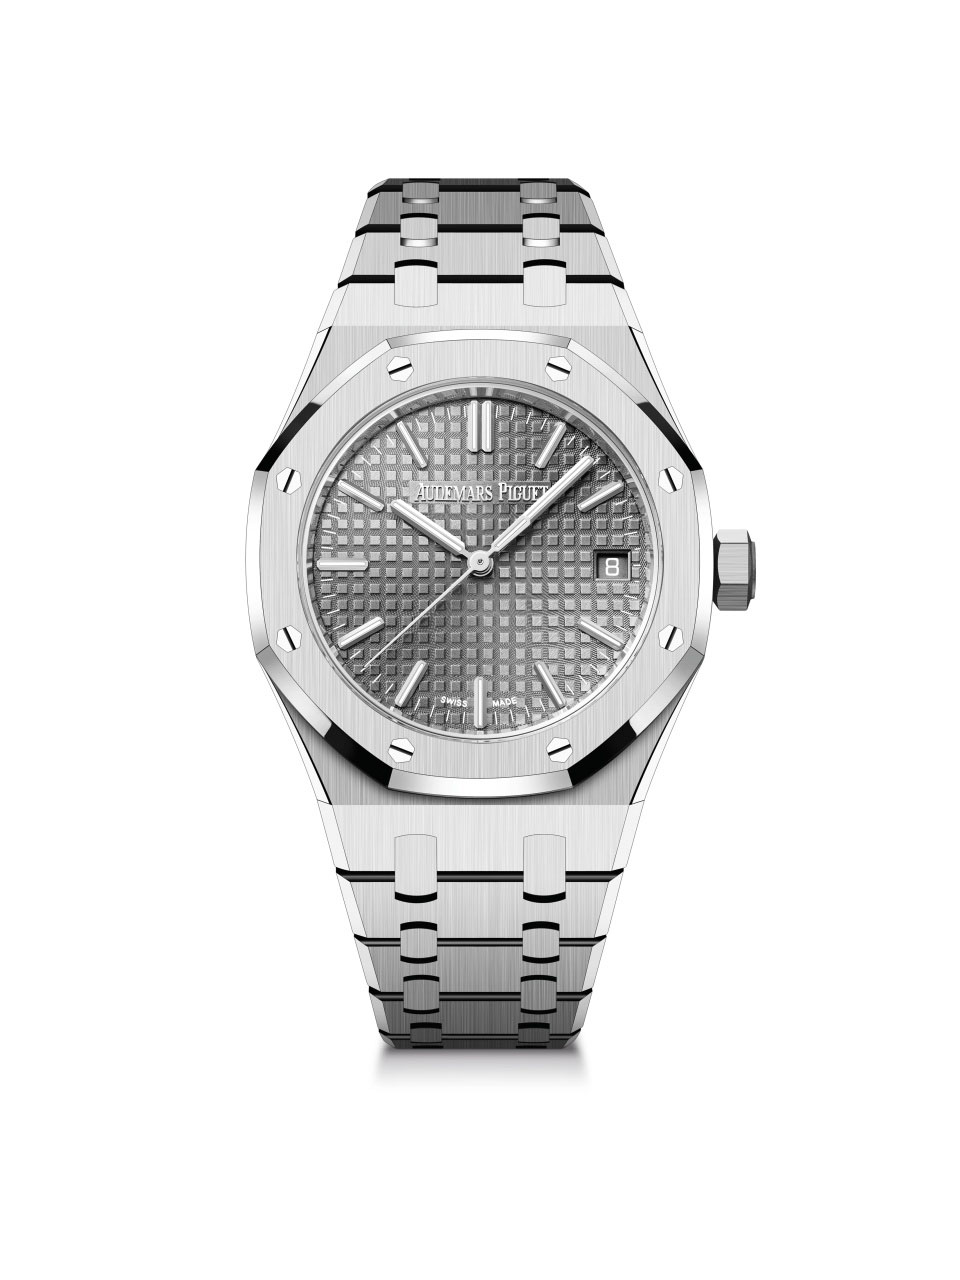 Royal Oak Selfwinding / 37mm; stainless steel case and bezel with grey dial (15550ST.OO.1356ST.03)